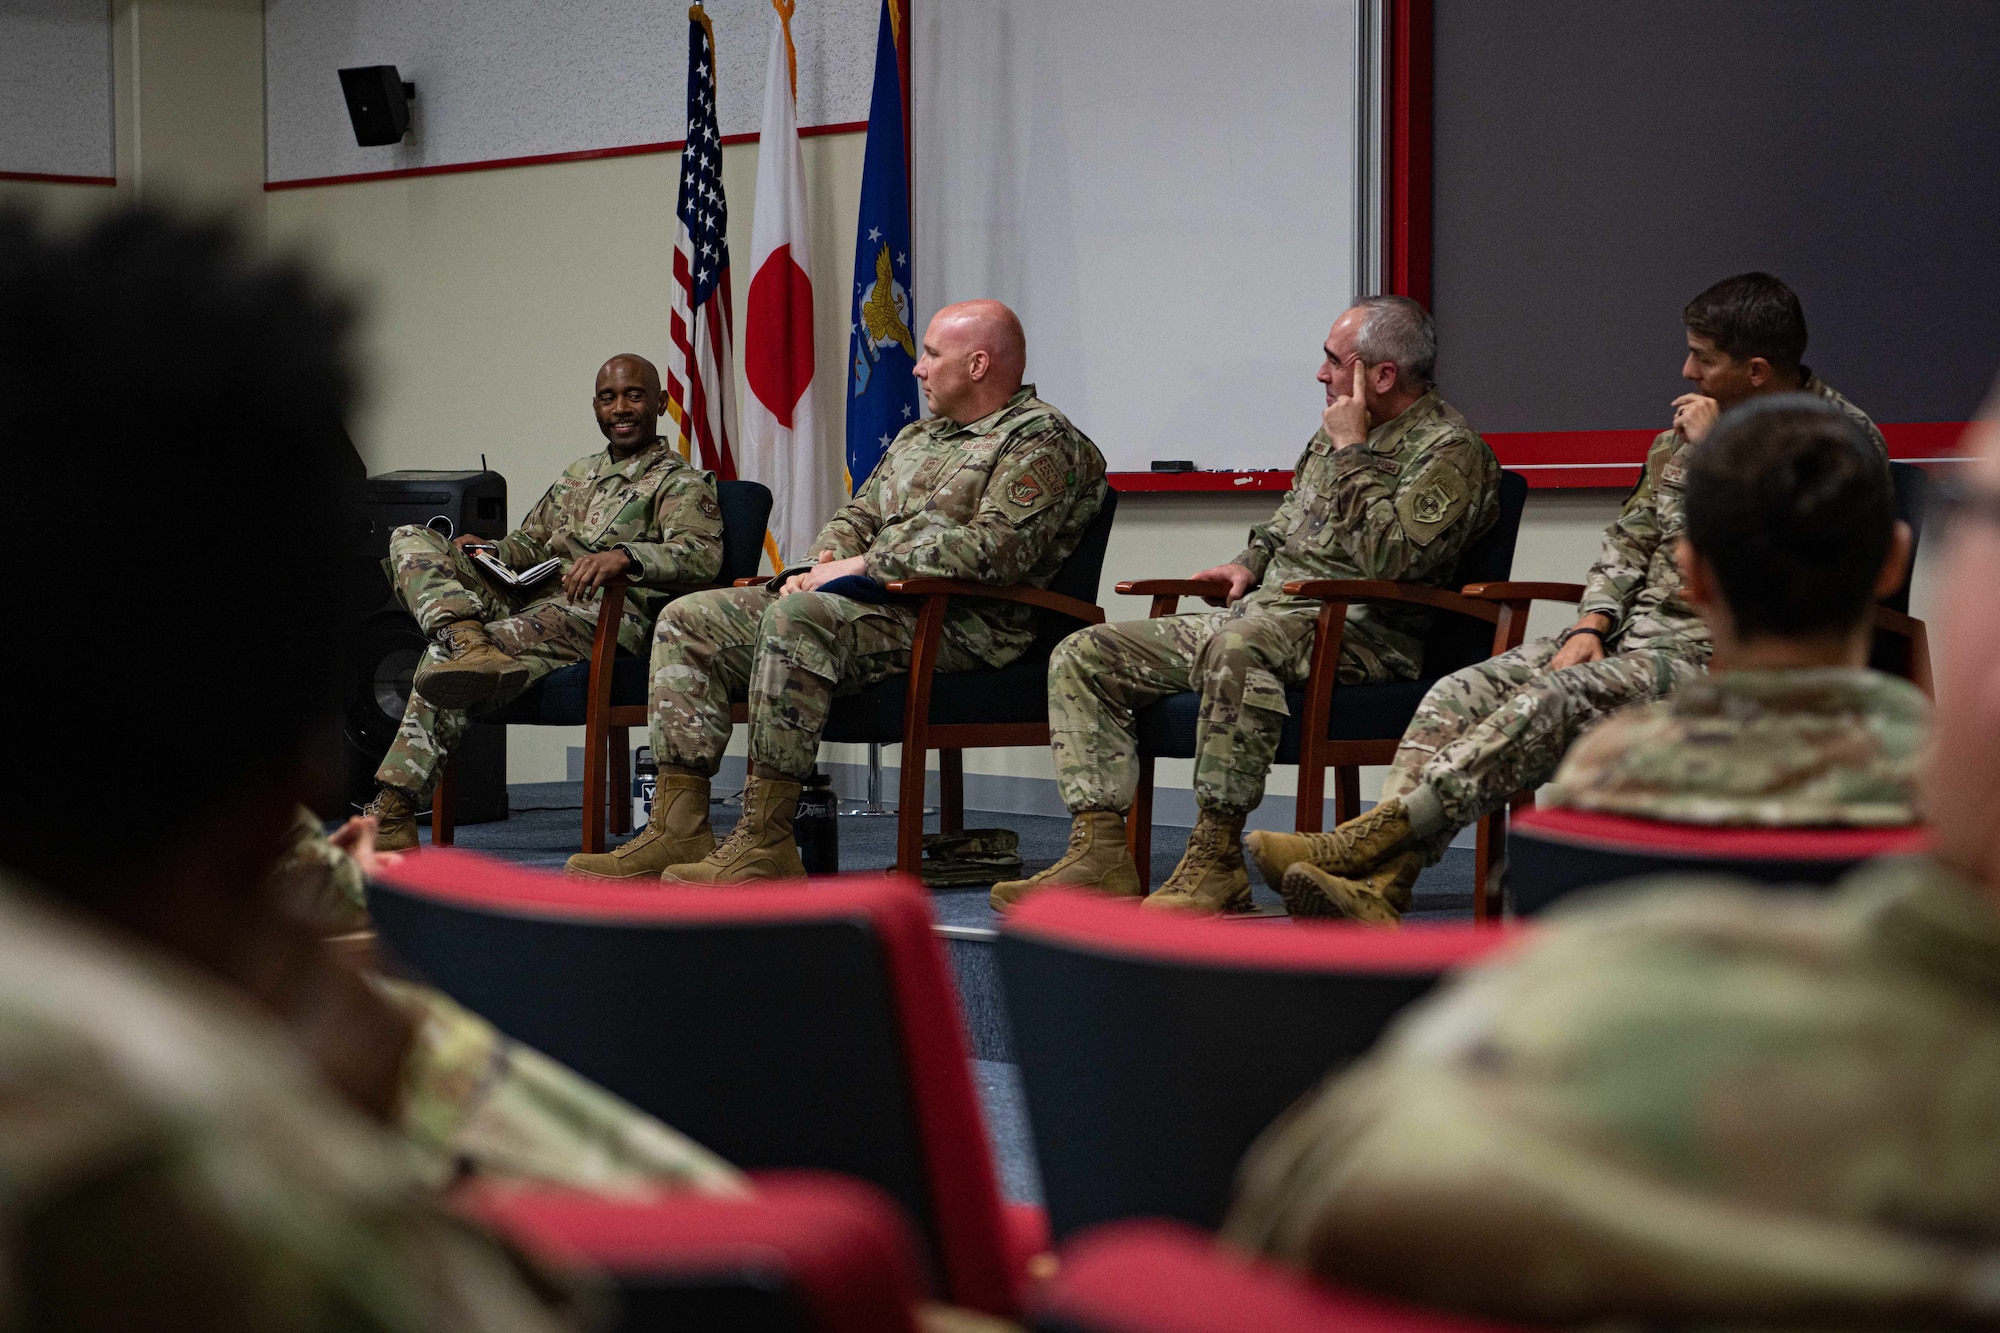 U.S. Air Force Chief Master Sgt. Kristopher Berg, 11th Air Force command chief, participates in a chiefs panel.